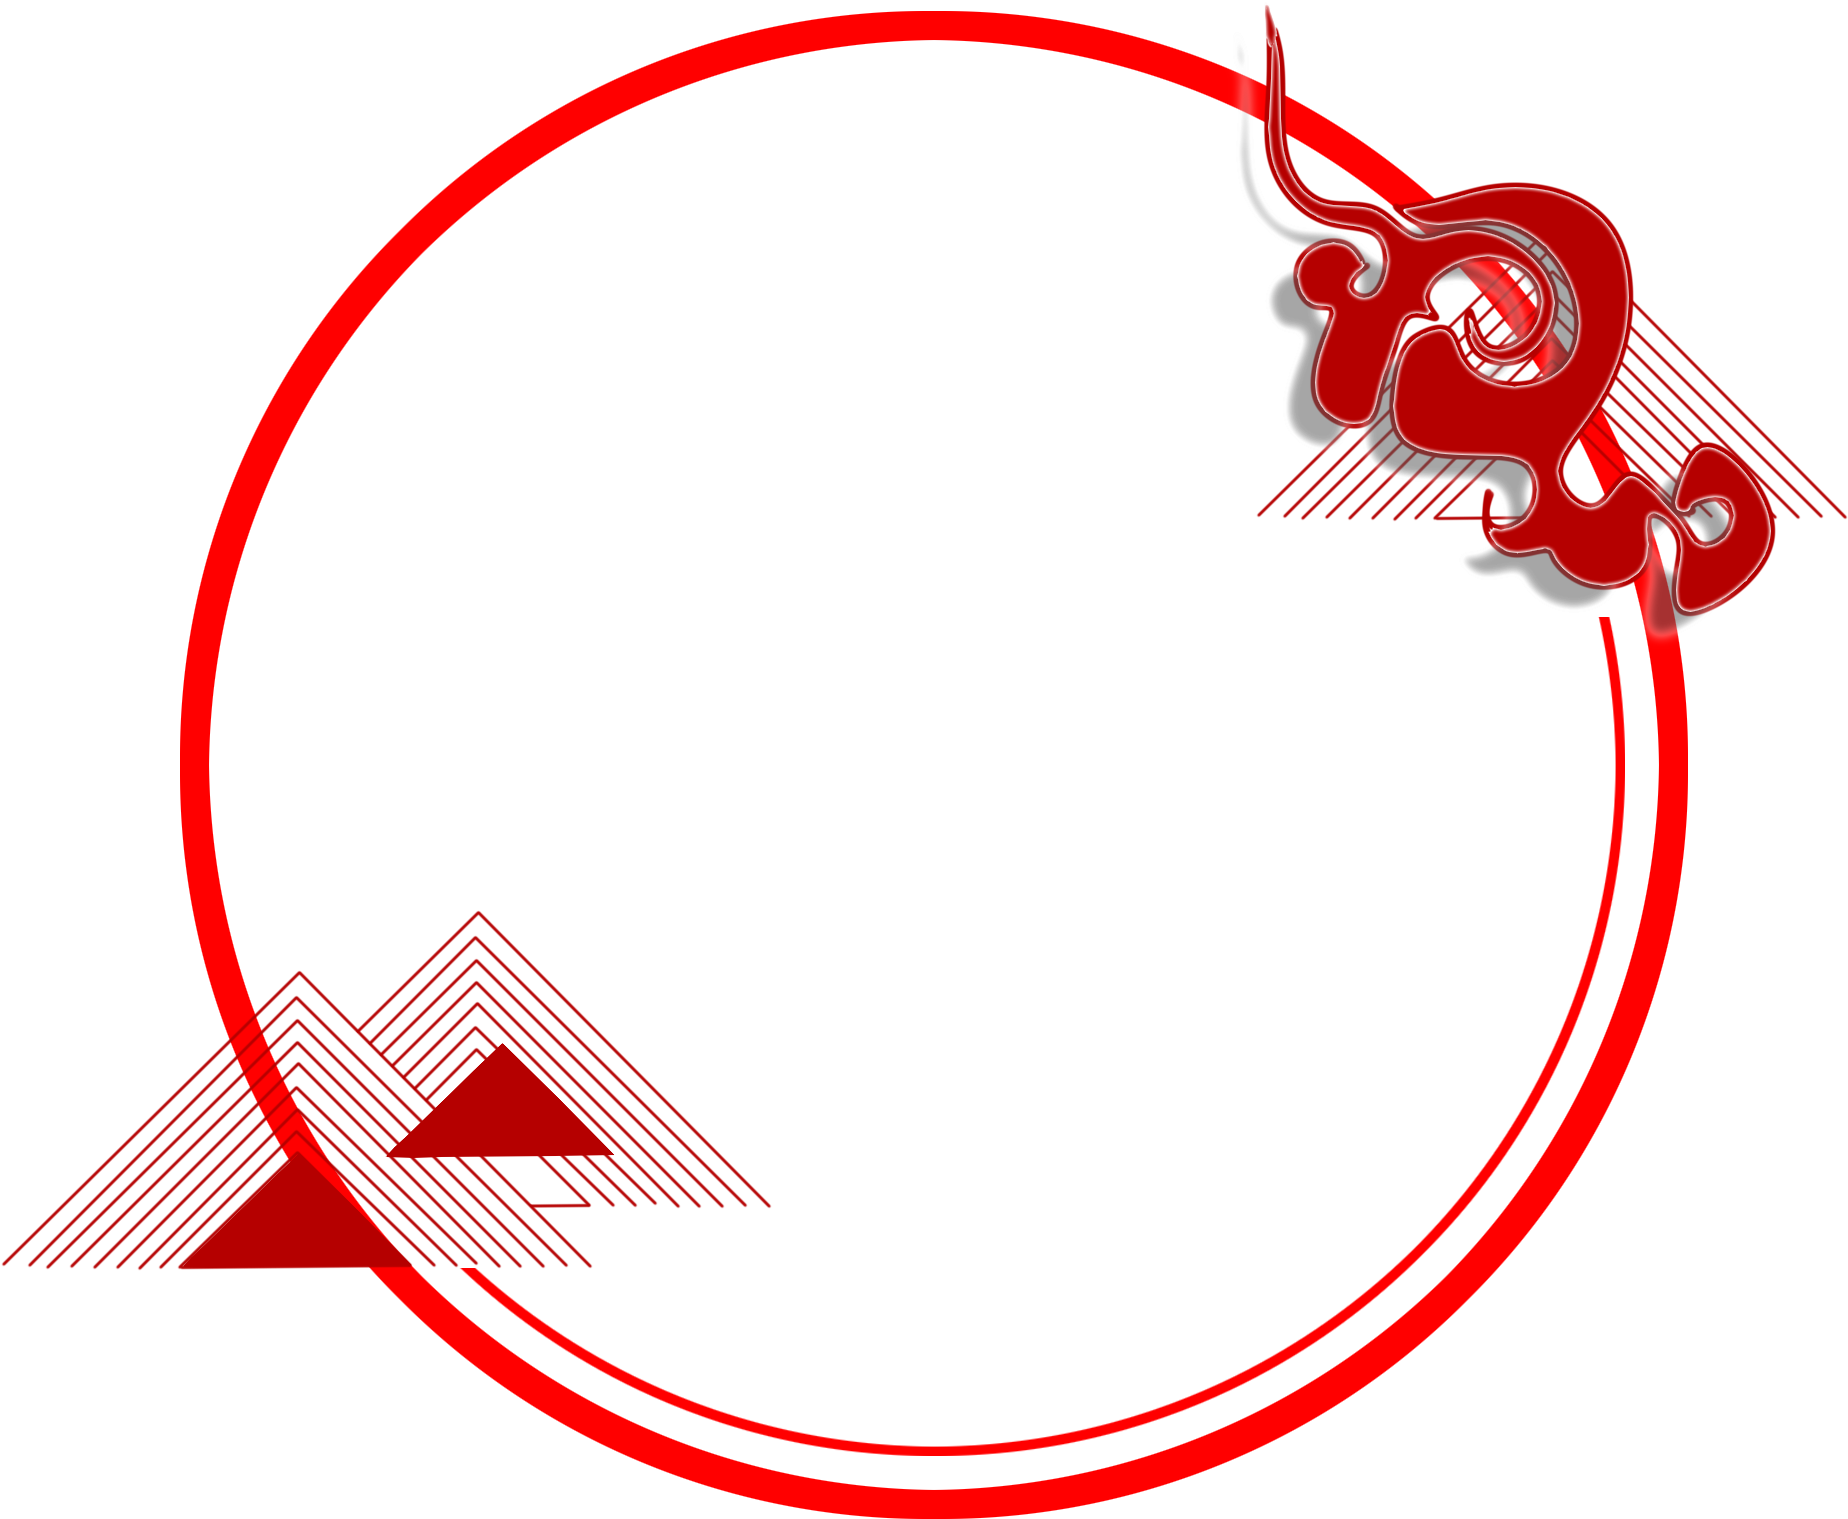 A Red And Black Circle With A Black Background